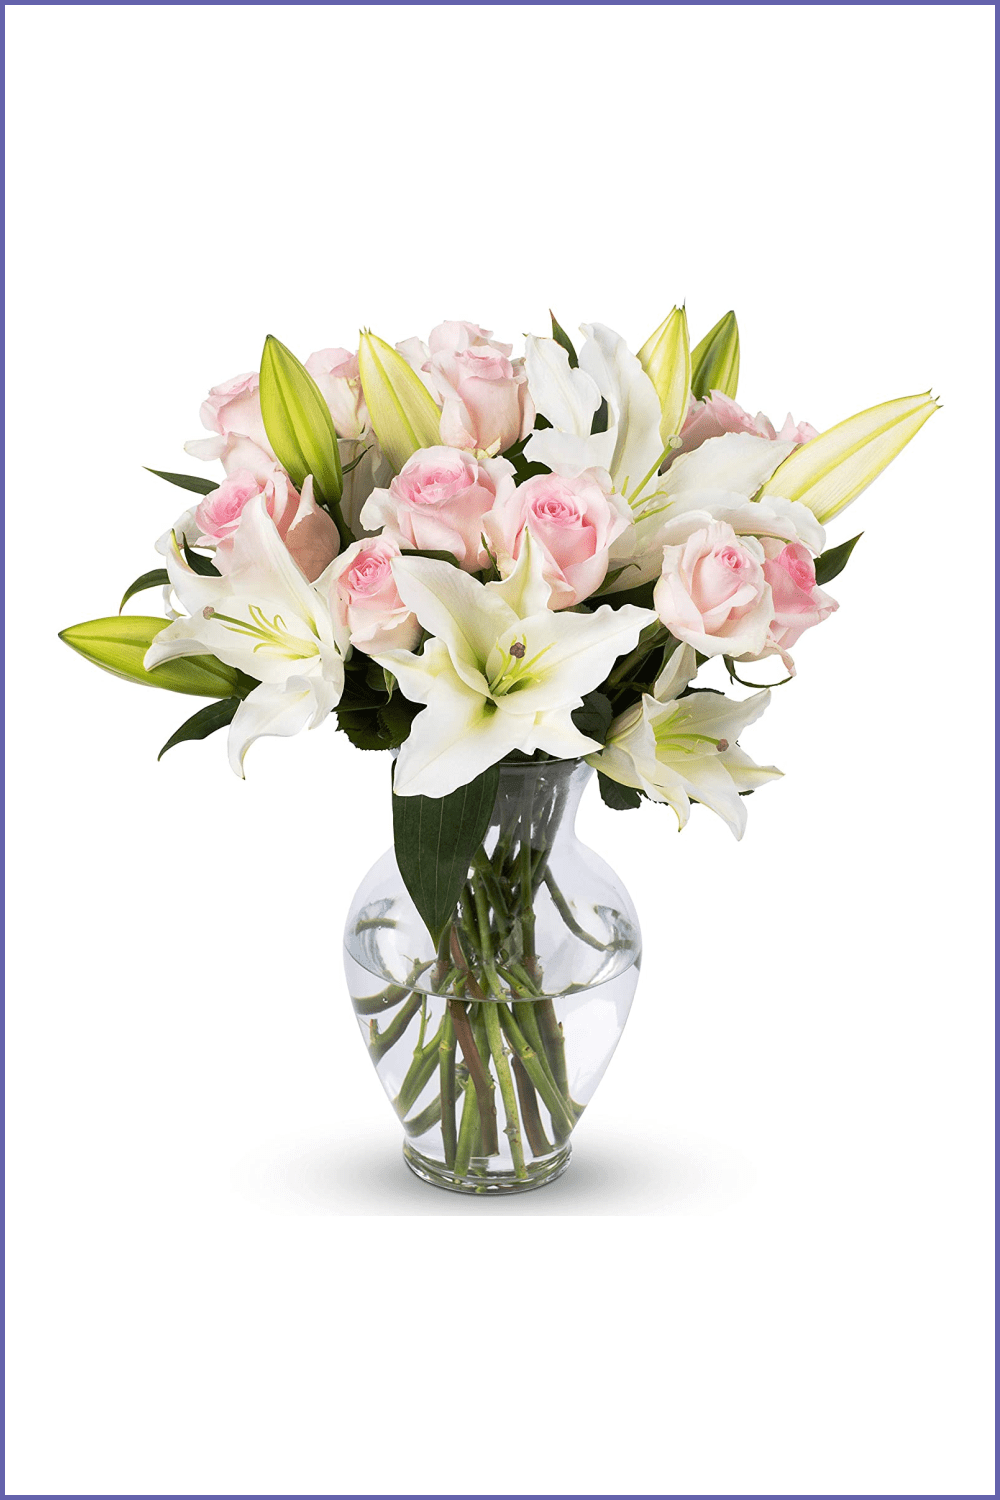 Benchmark Bouquets Pink Roses and White Lilies, With Vase.